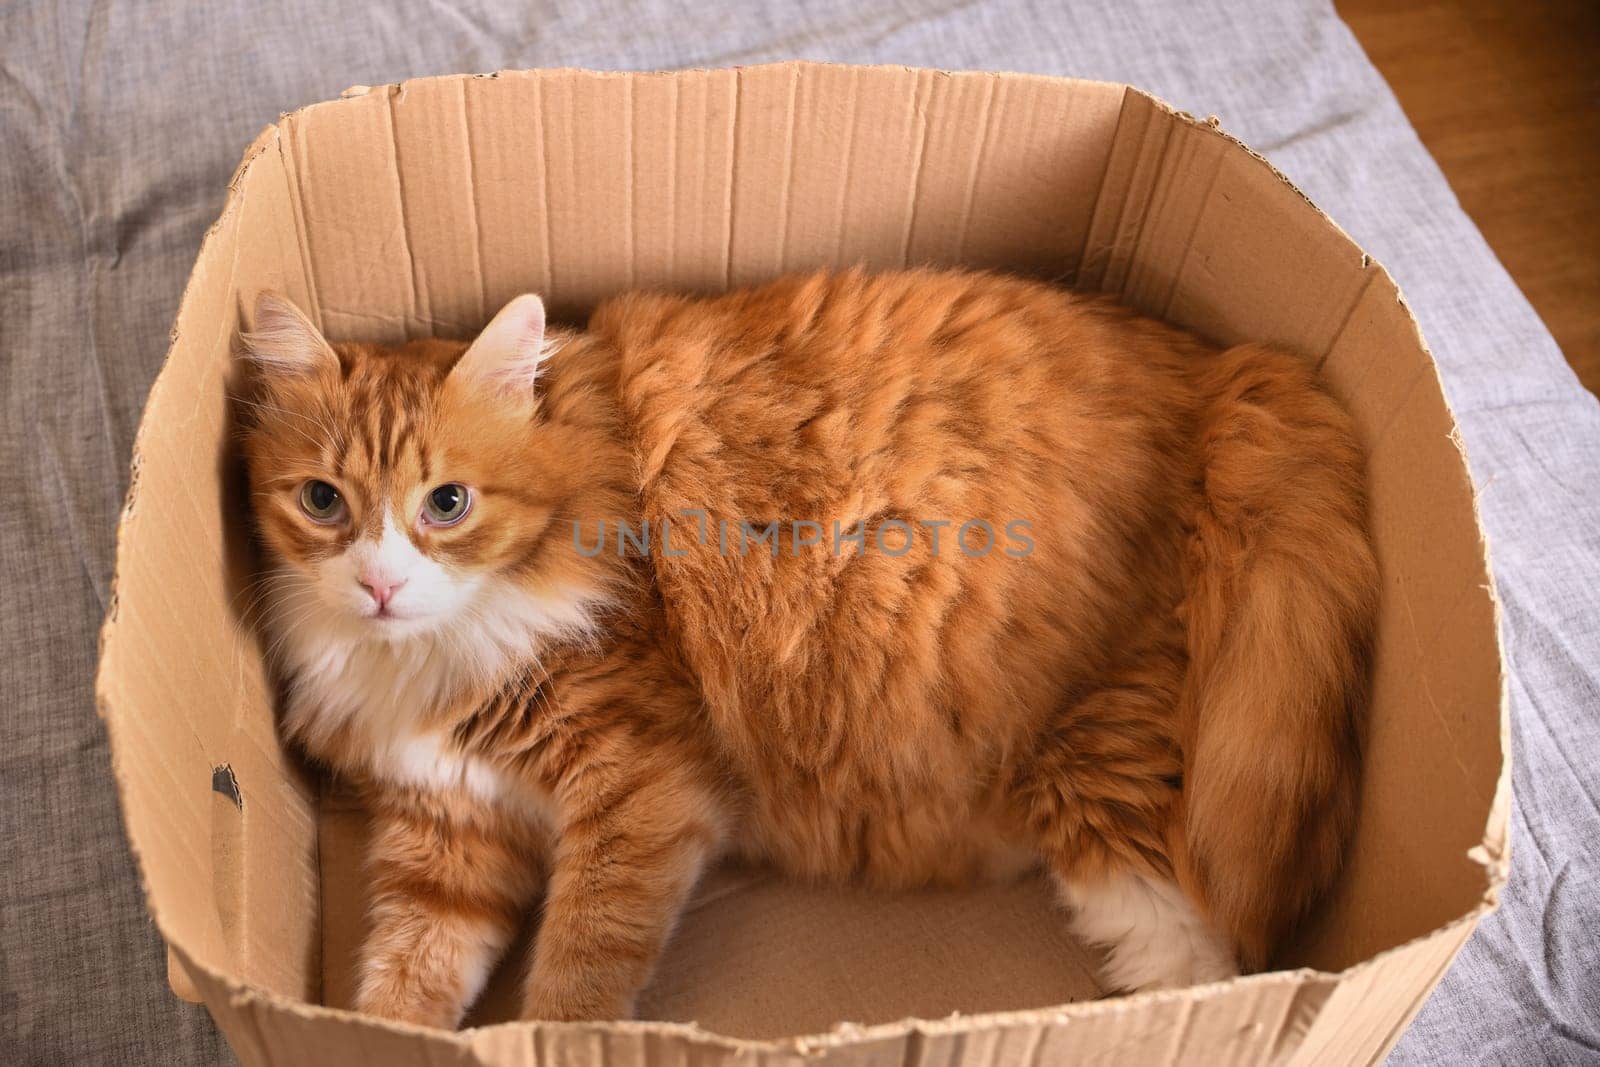 A ginger cat lies in a cardboard box, his gaze is directed upward.